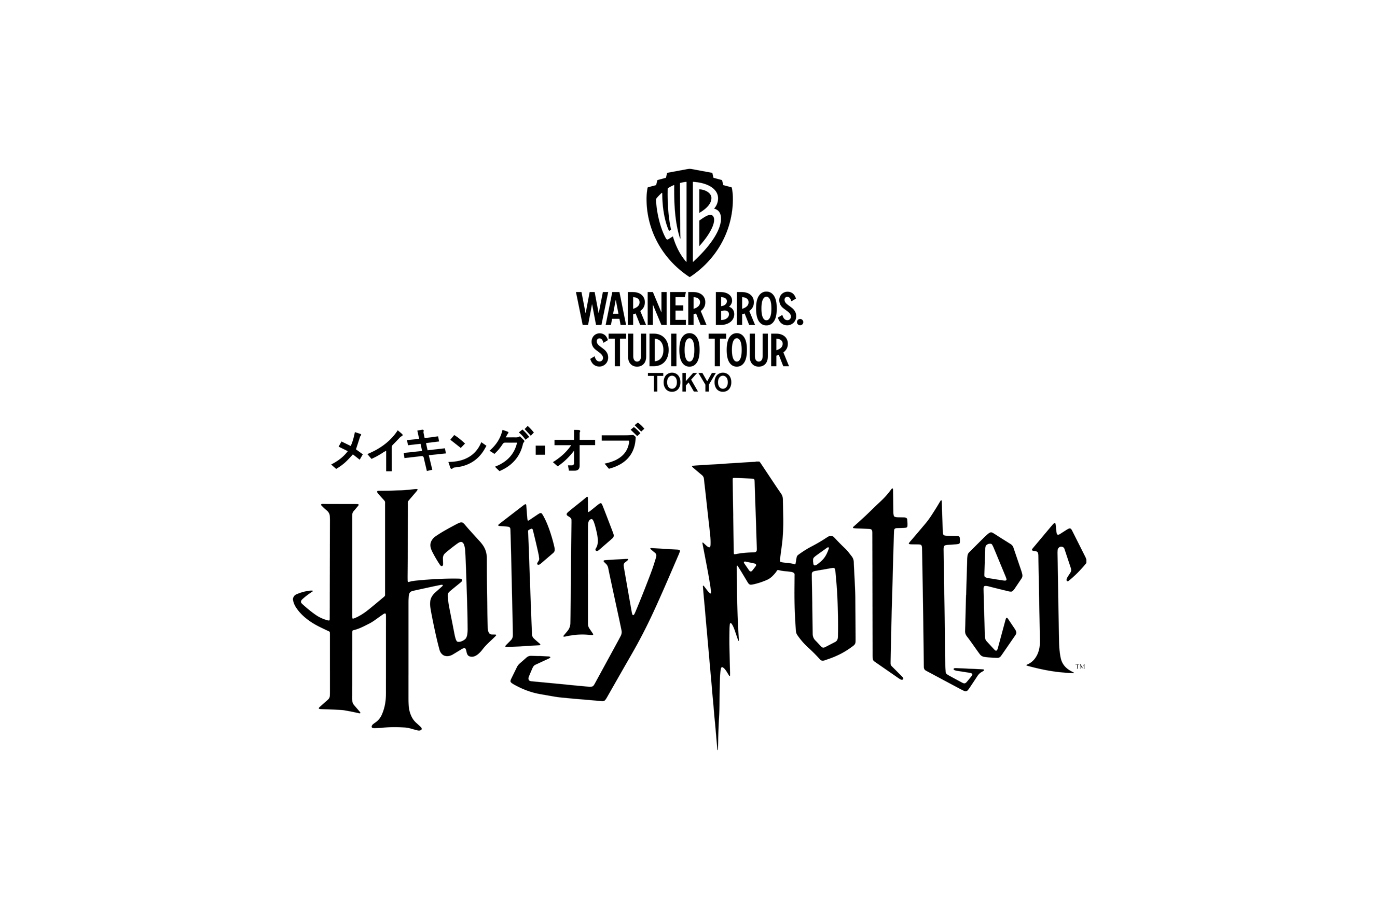 ‘Wizarding World’ and all related names, characters and indicia are trademarks of and -Warner Bros. Entertainment Inc. 